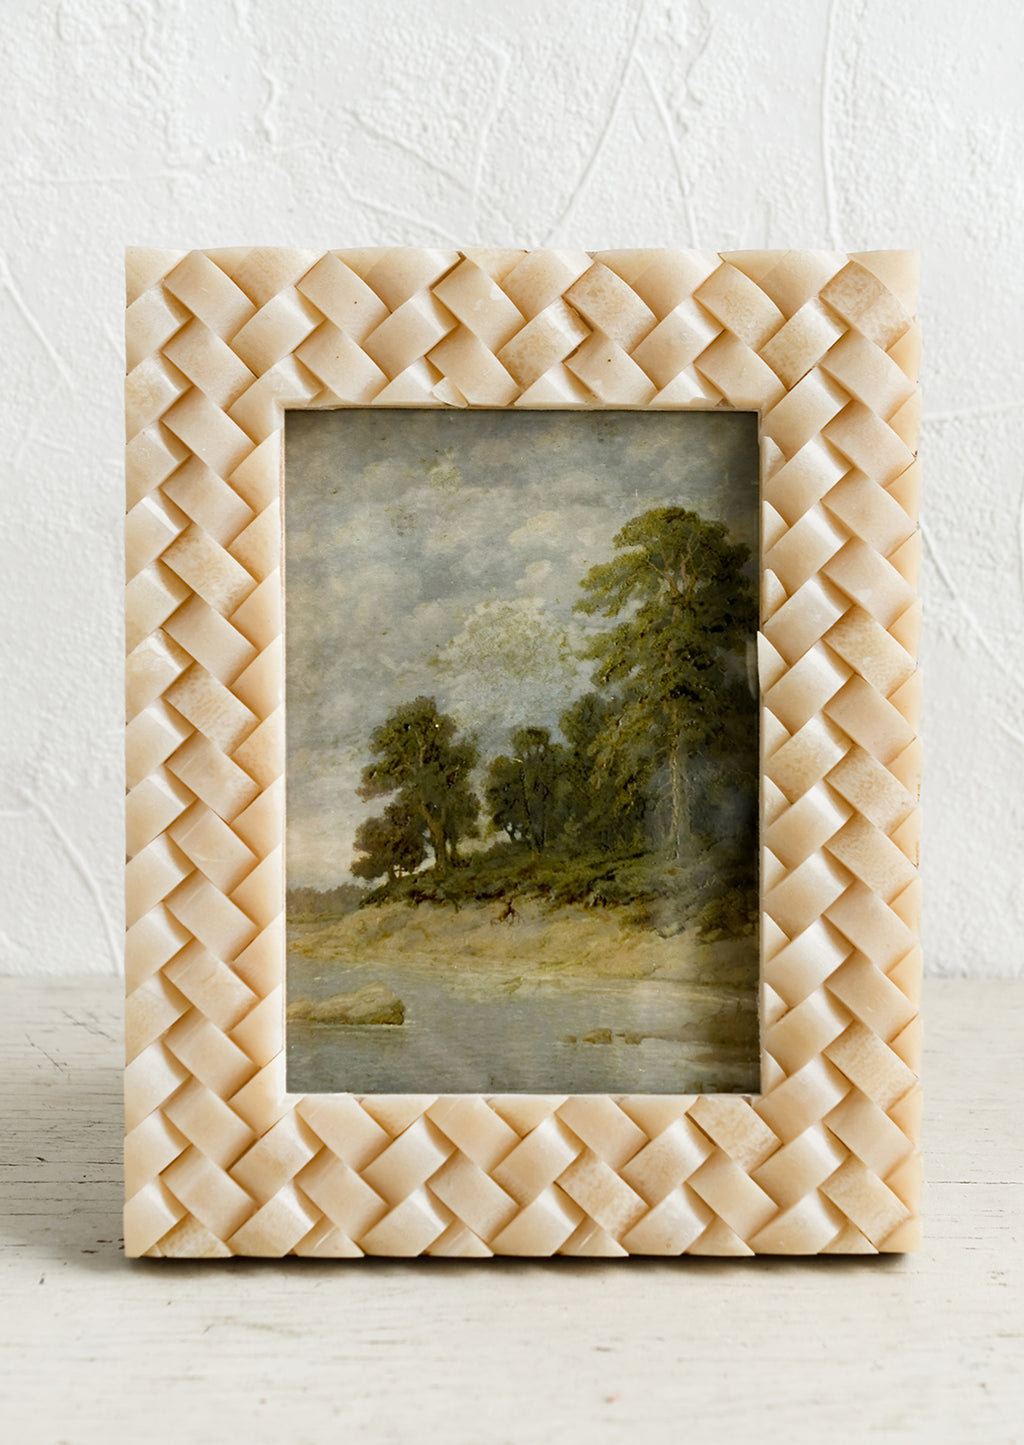 1: A resin picture frame in tan with basketweave texture.